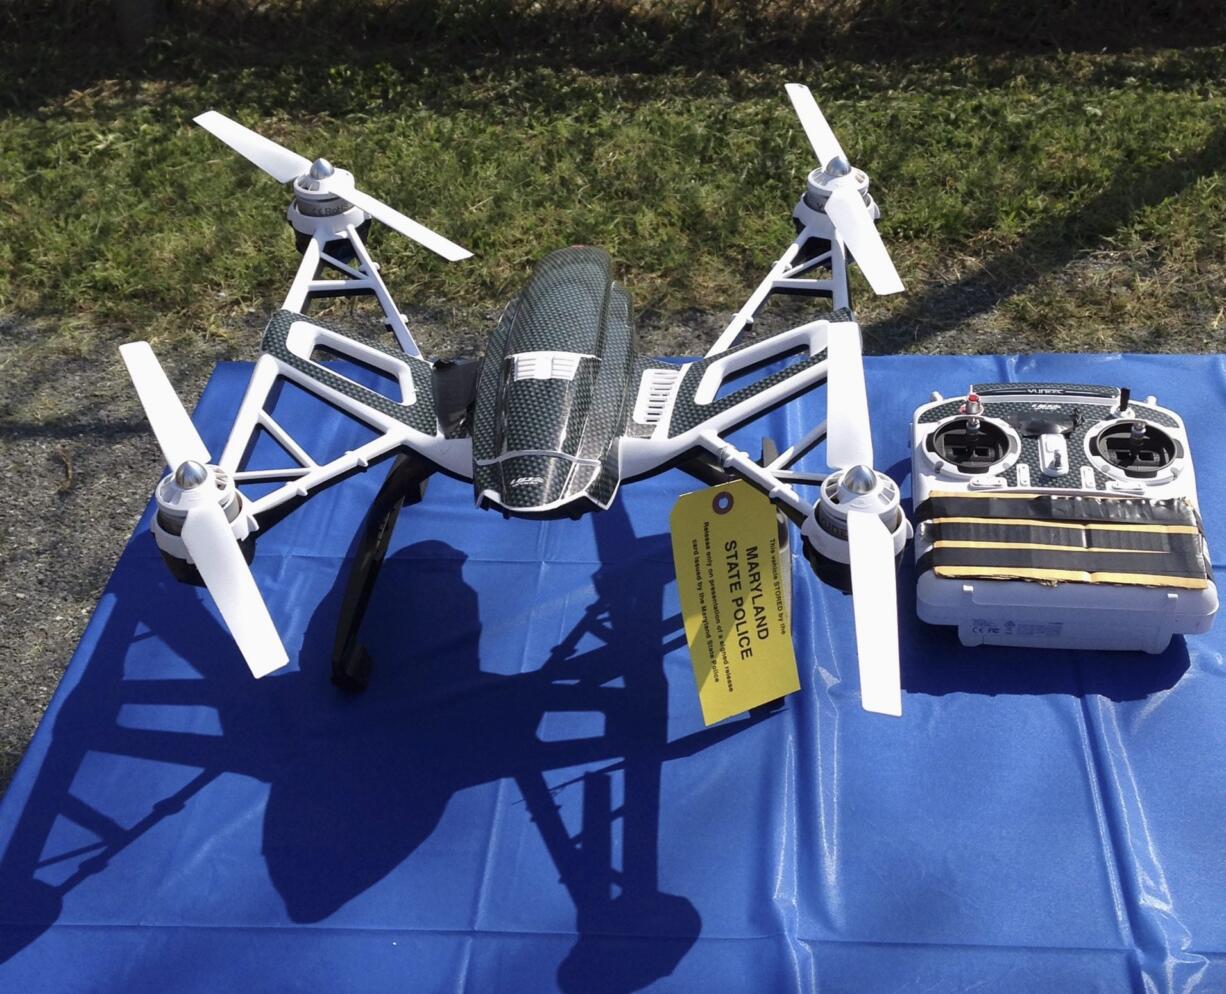 A Yuneec Typhoon drone and controller in Jessup, Md. Maryland State Police and prison officials say two men planned to use the drone to smuggle drugs, tobacco and pornography videos into the maximum-security Western Correctional Institution near Cumberland, Md.